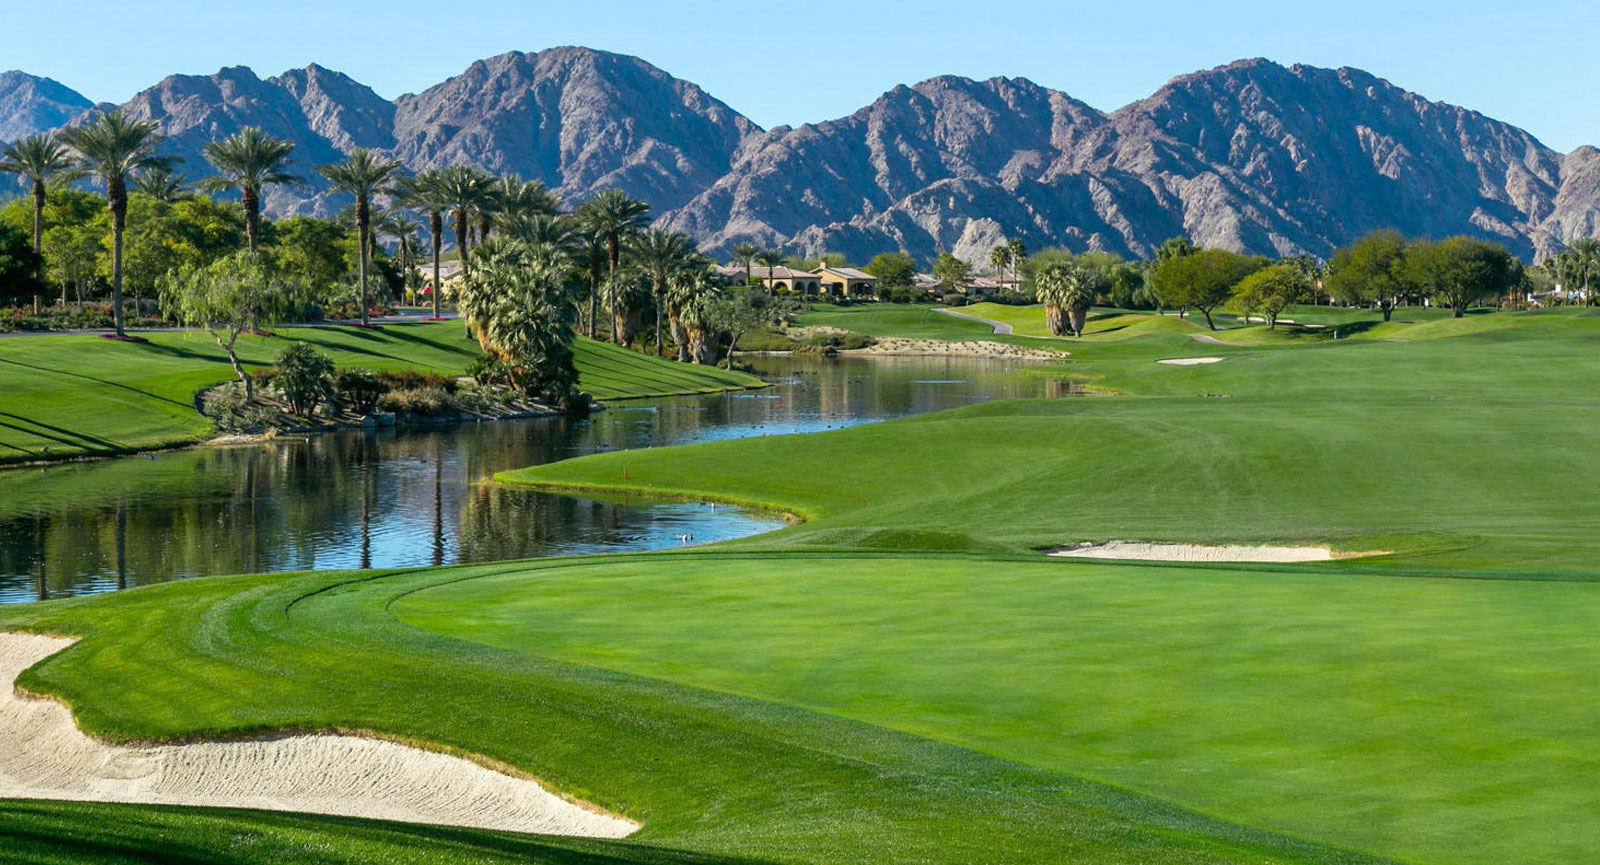 Golf Course in Palm Springs